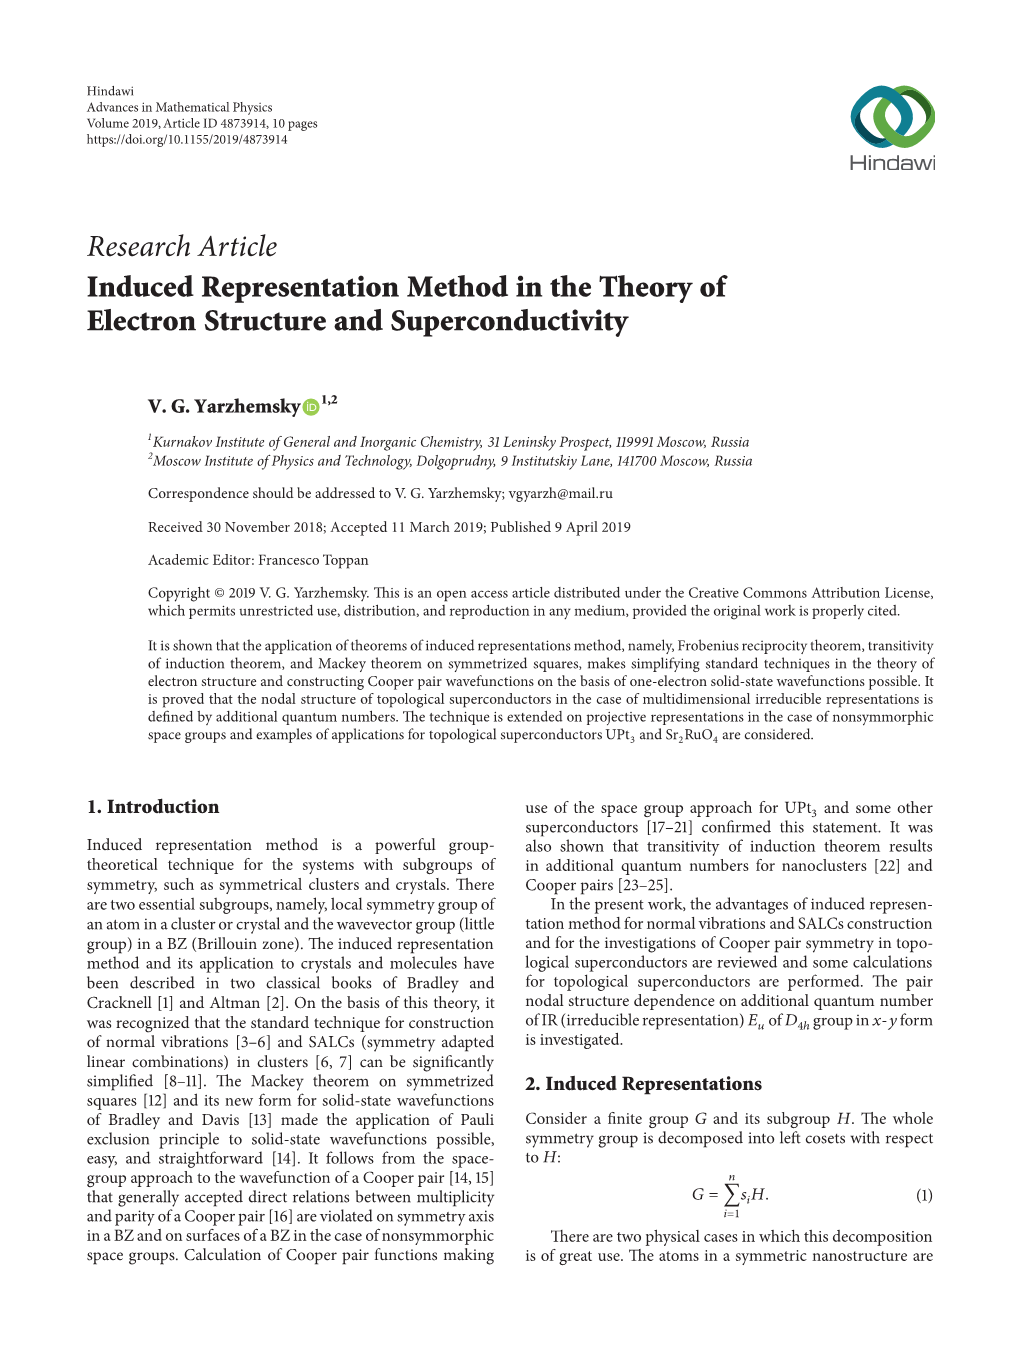 Research Article Induced Representation Method in the Theory of Electron Structure and Superconductivity